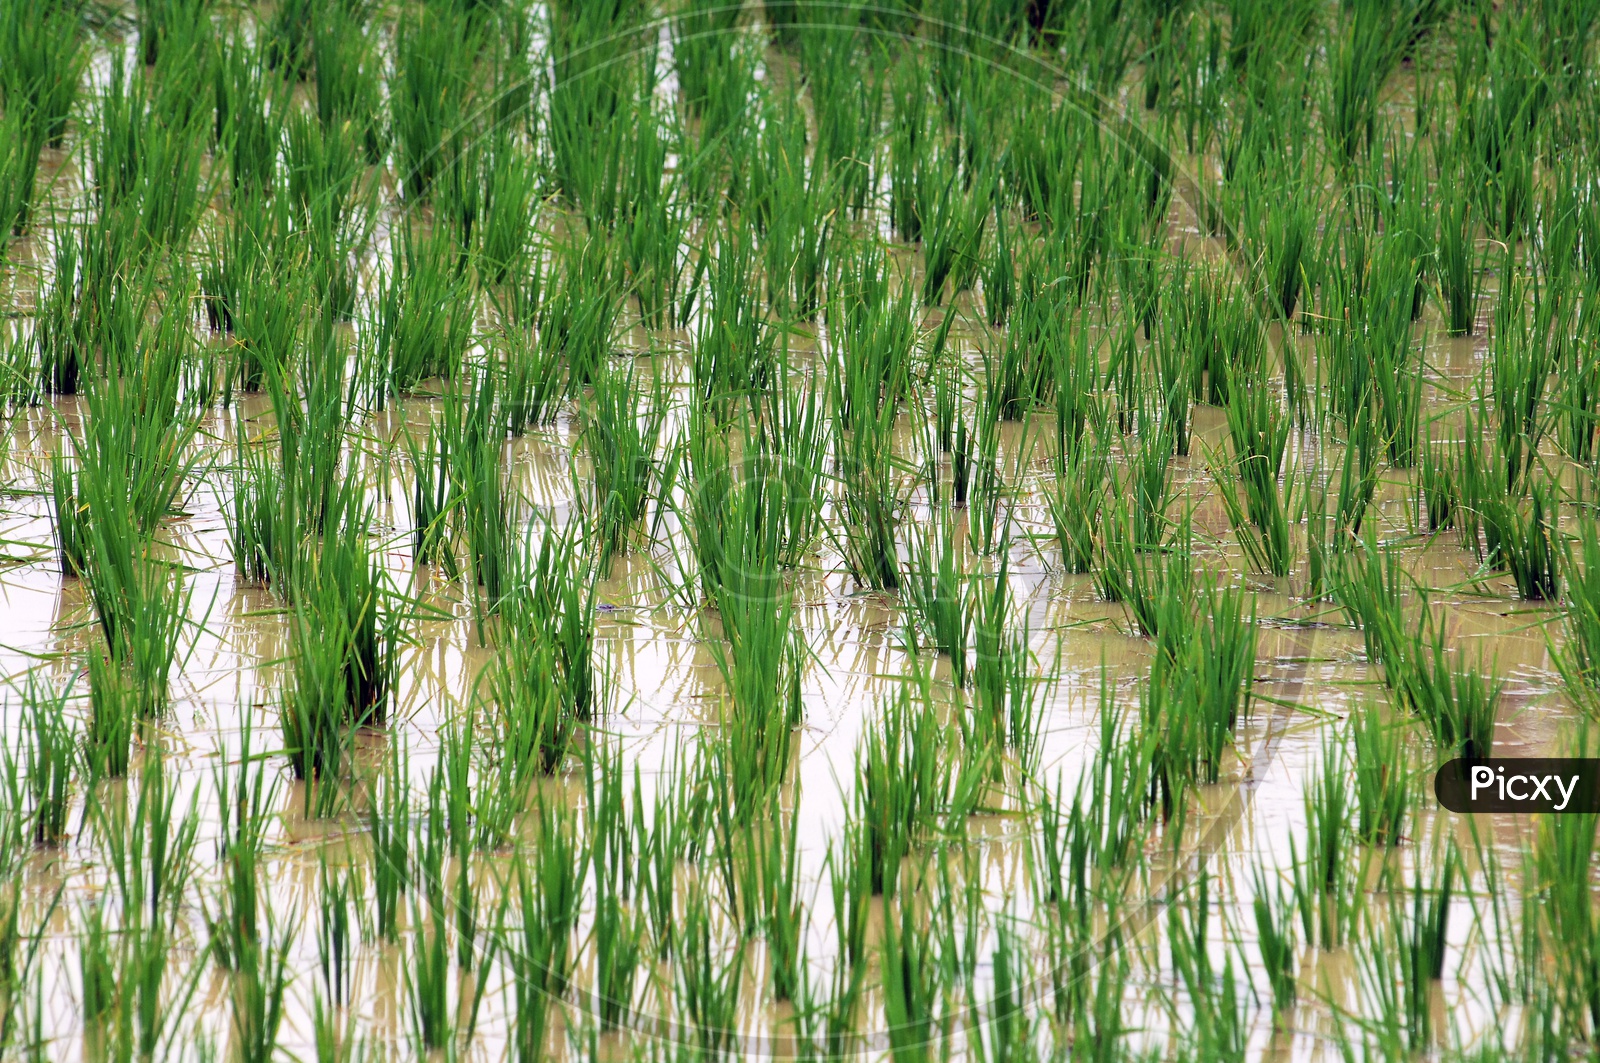 Paddy field with water